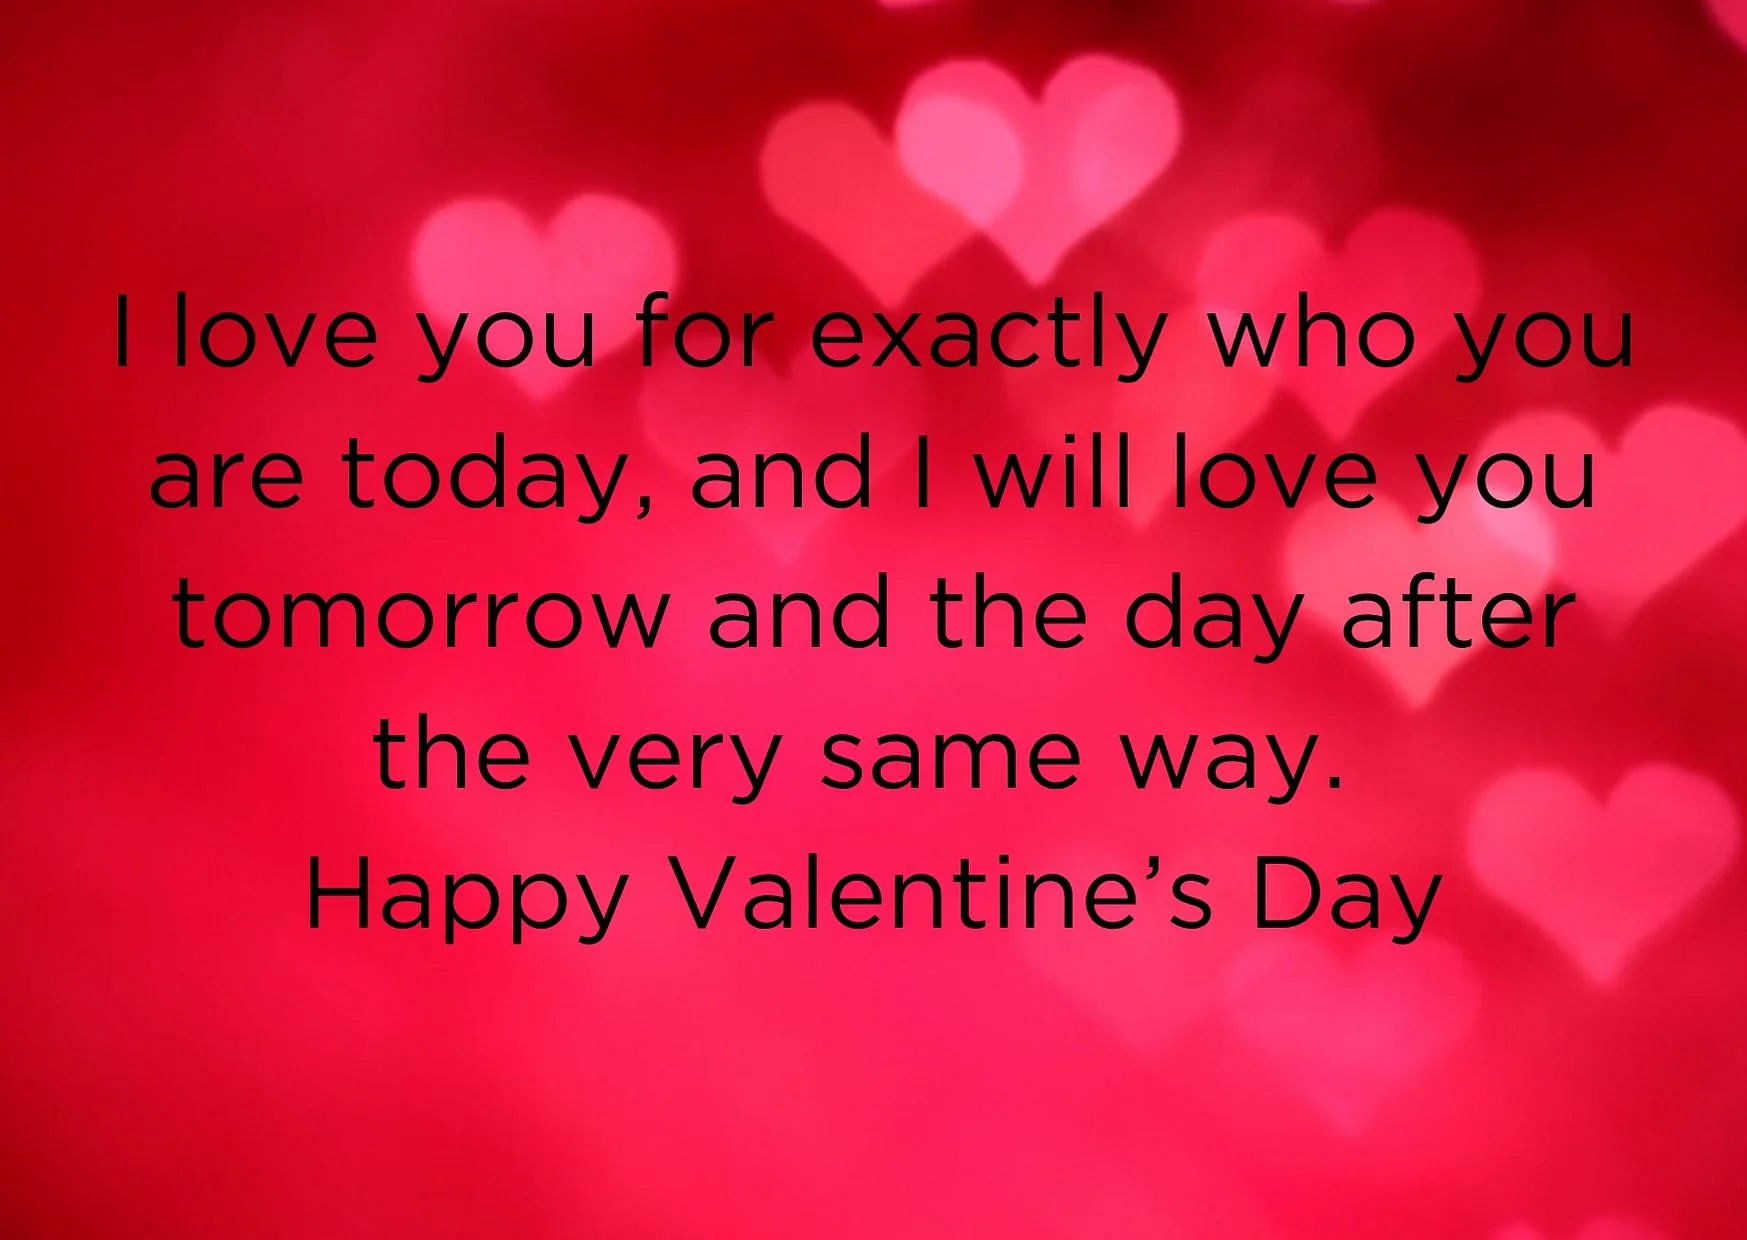 Happy Valentine S Day 2021 Quotes In English Hindi Valentine S Day Images Wishes To Send On Whatsapp Facebook Instagram Upload As Whatsapp Insta Story Whenever i feel like giving up, your love keeps me going. happy valentine s day 2021 quotes in